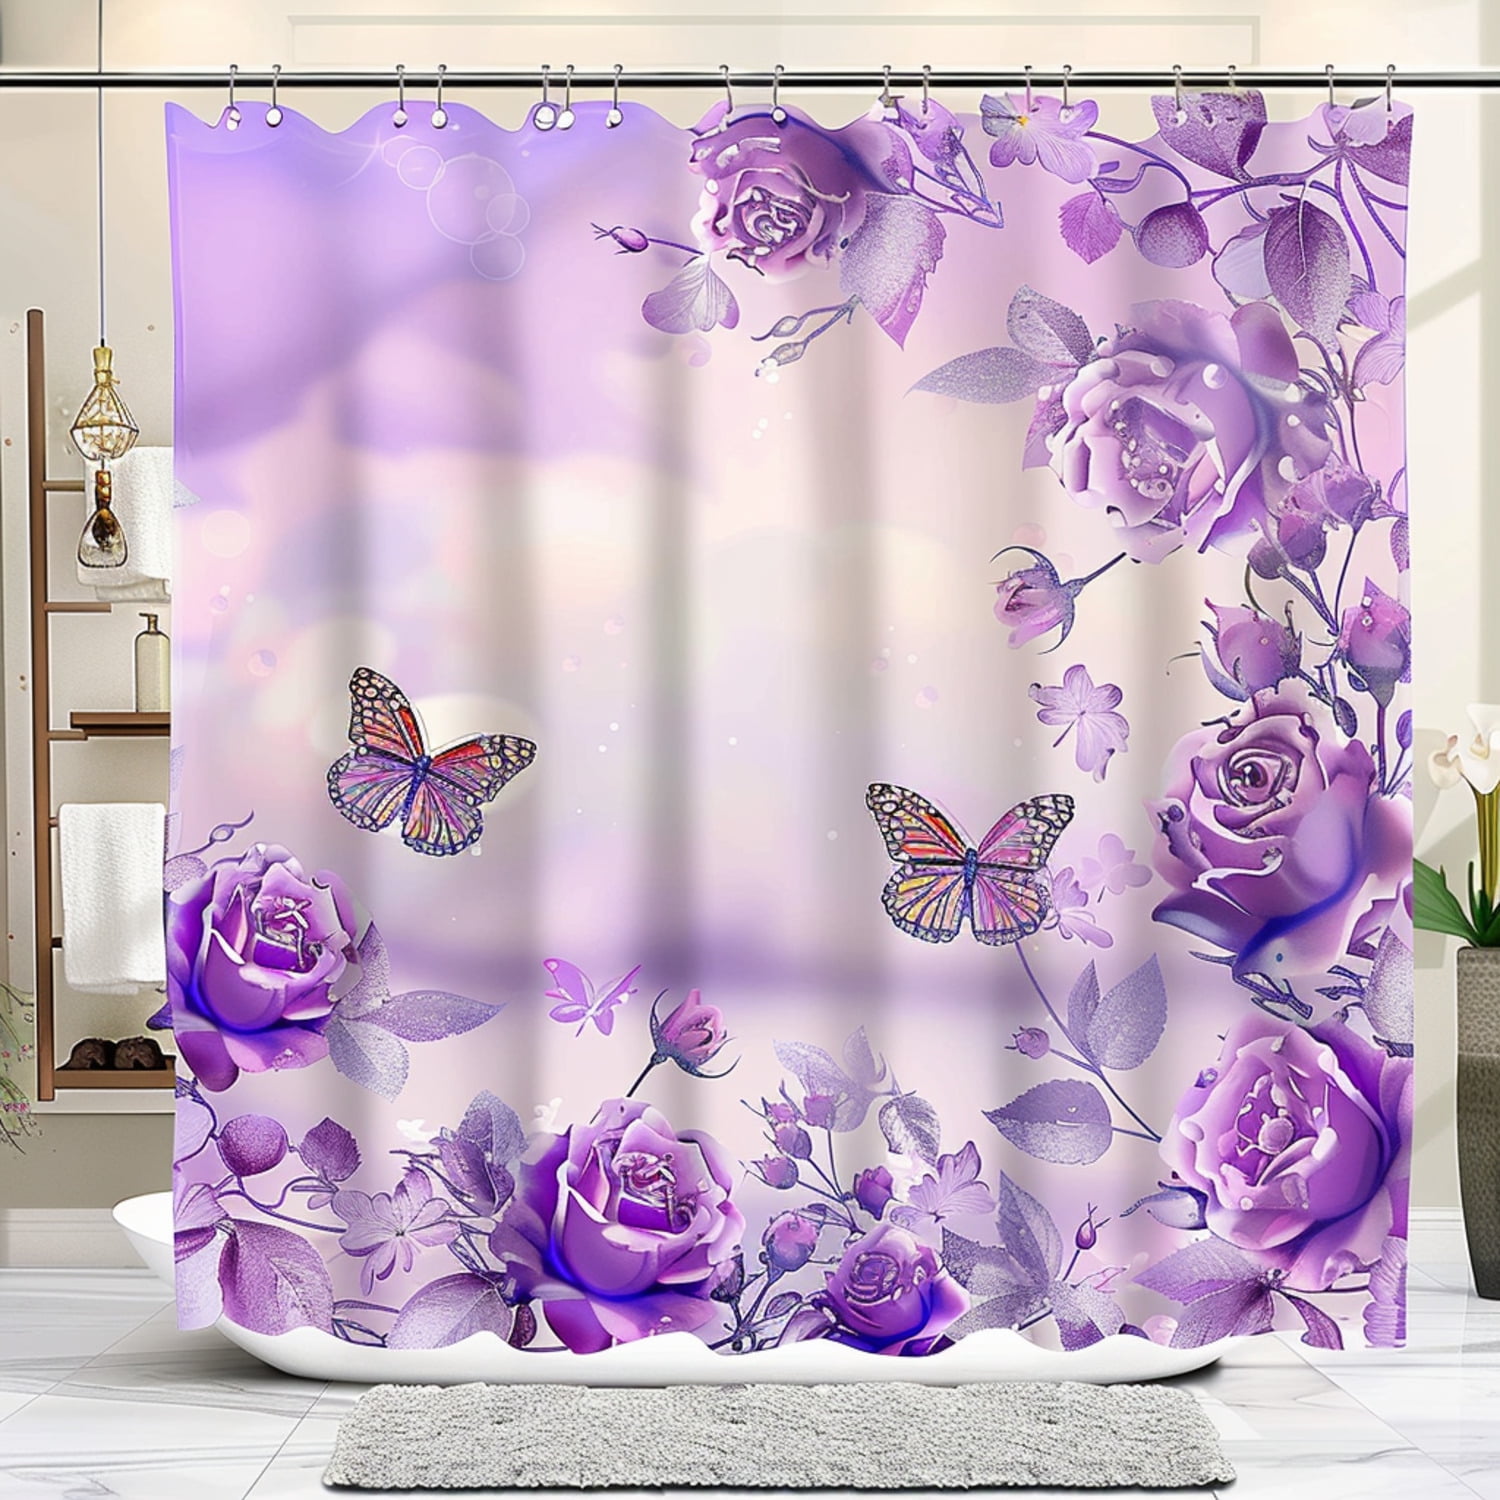 3D Purple Roses and Butterflies Shower Curtain Set with Pink Butterfly ...